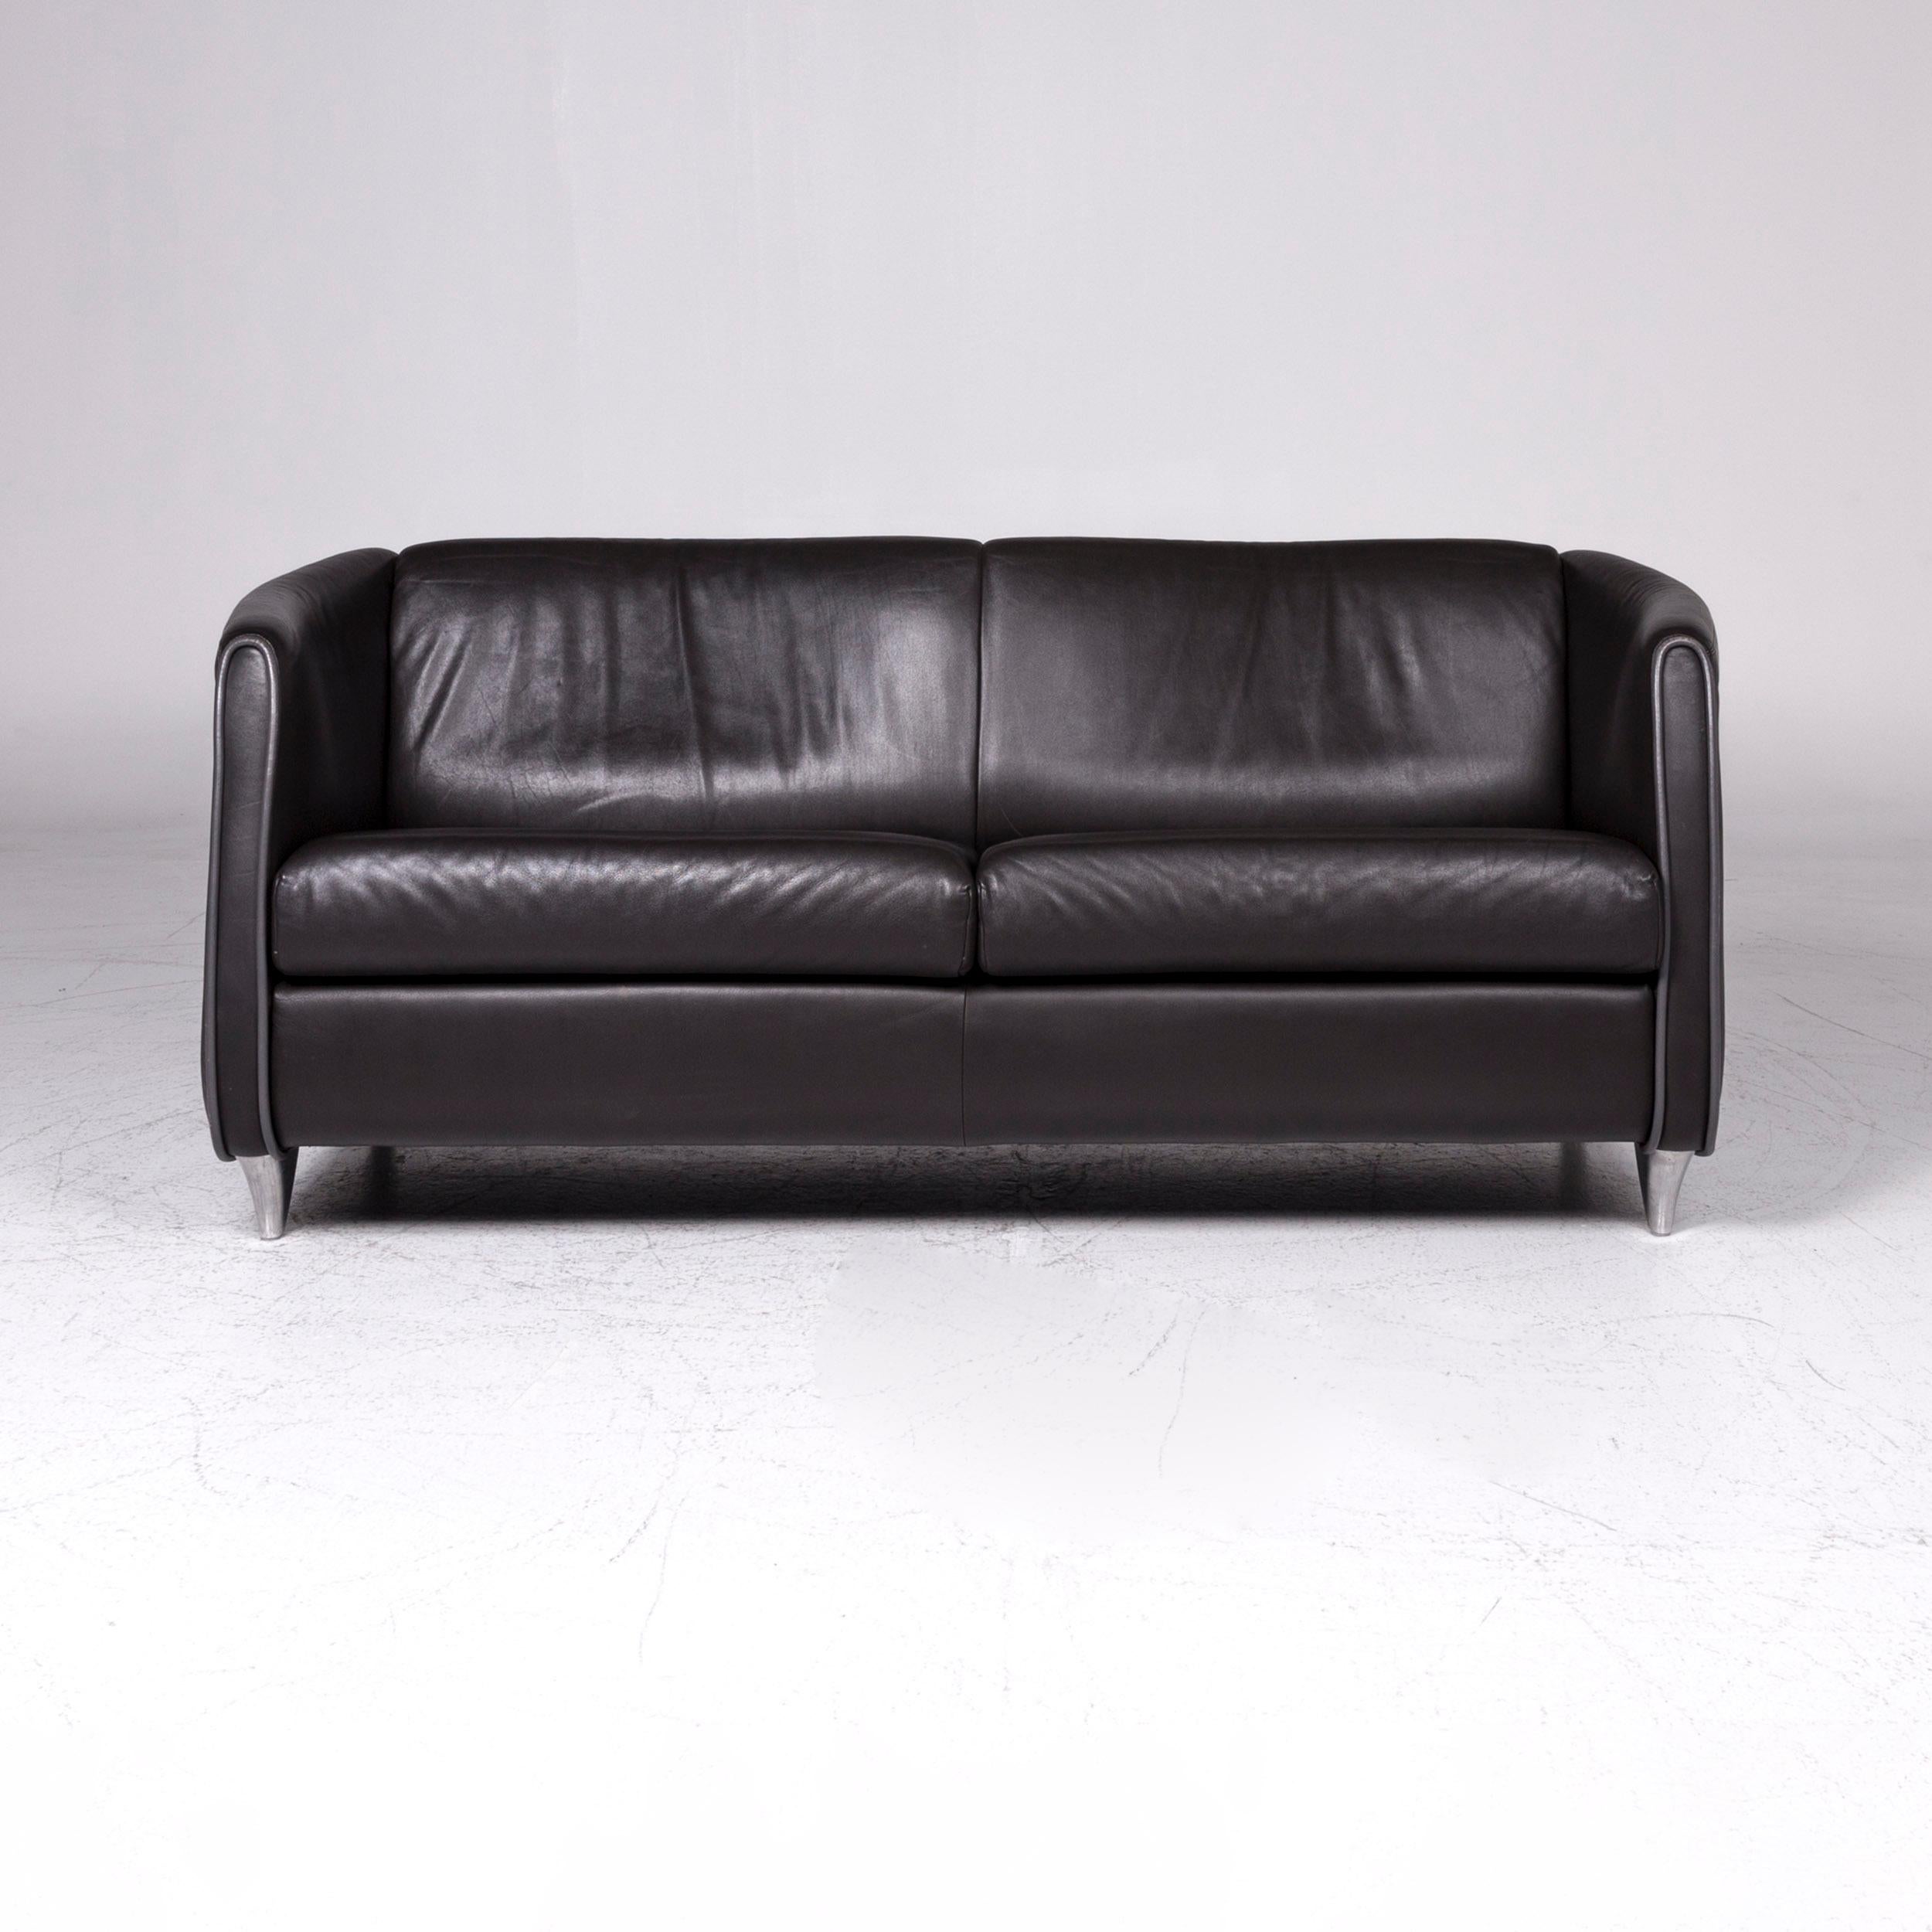 We bring to you a De Sede designer leather sofa black two-seat couch.
 
Product measurements in centimetres:
 
Depth 80
Width 176
Height 76
Seat-height 46
Rest-height 74
Seat-depth 51
Seat-width 146
Back-height 37.
 